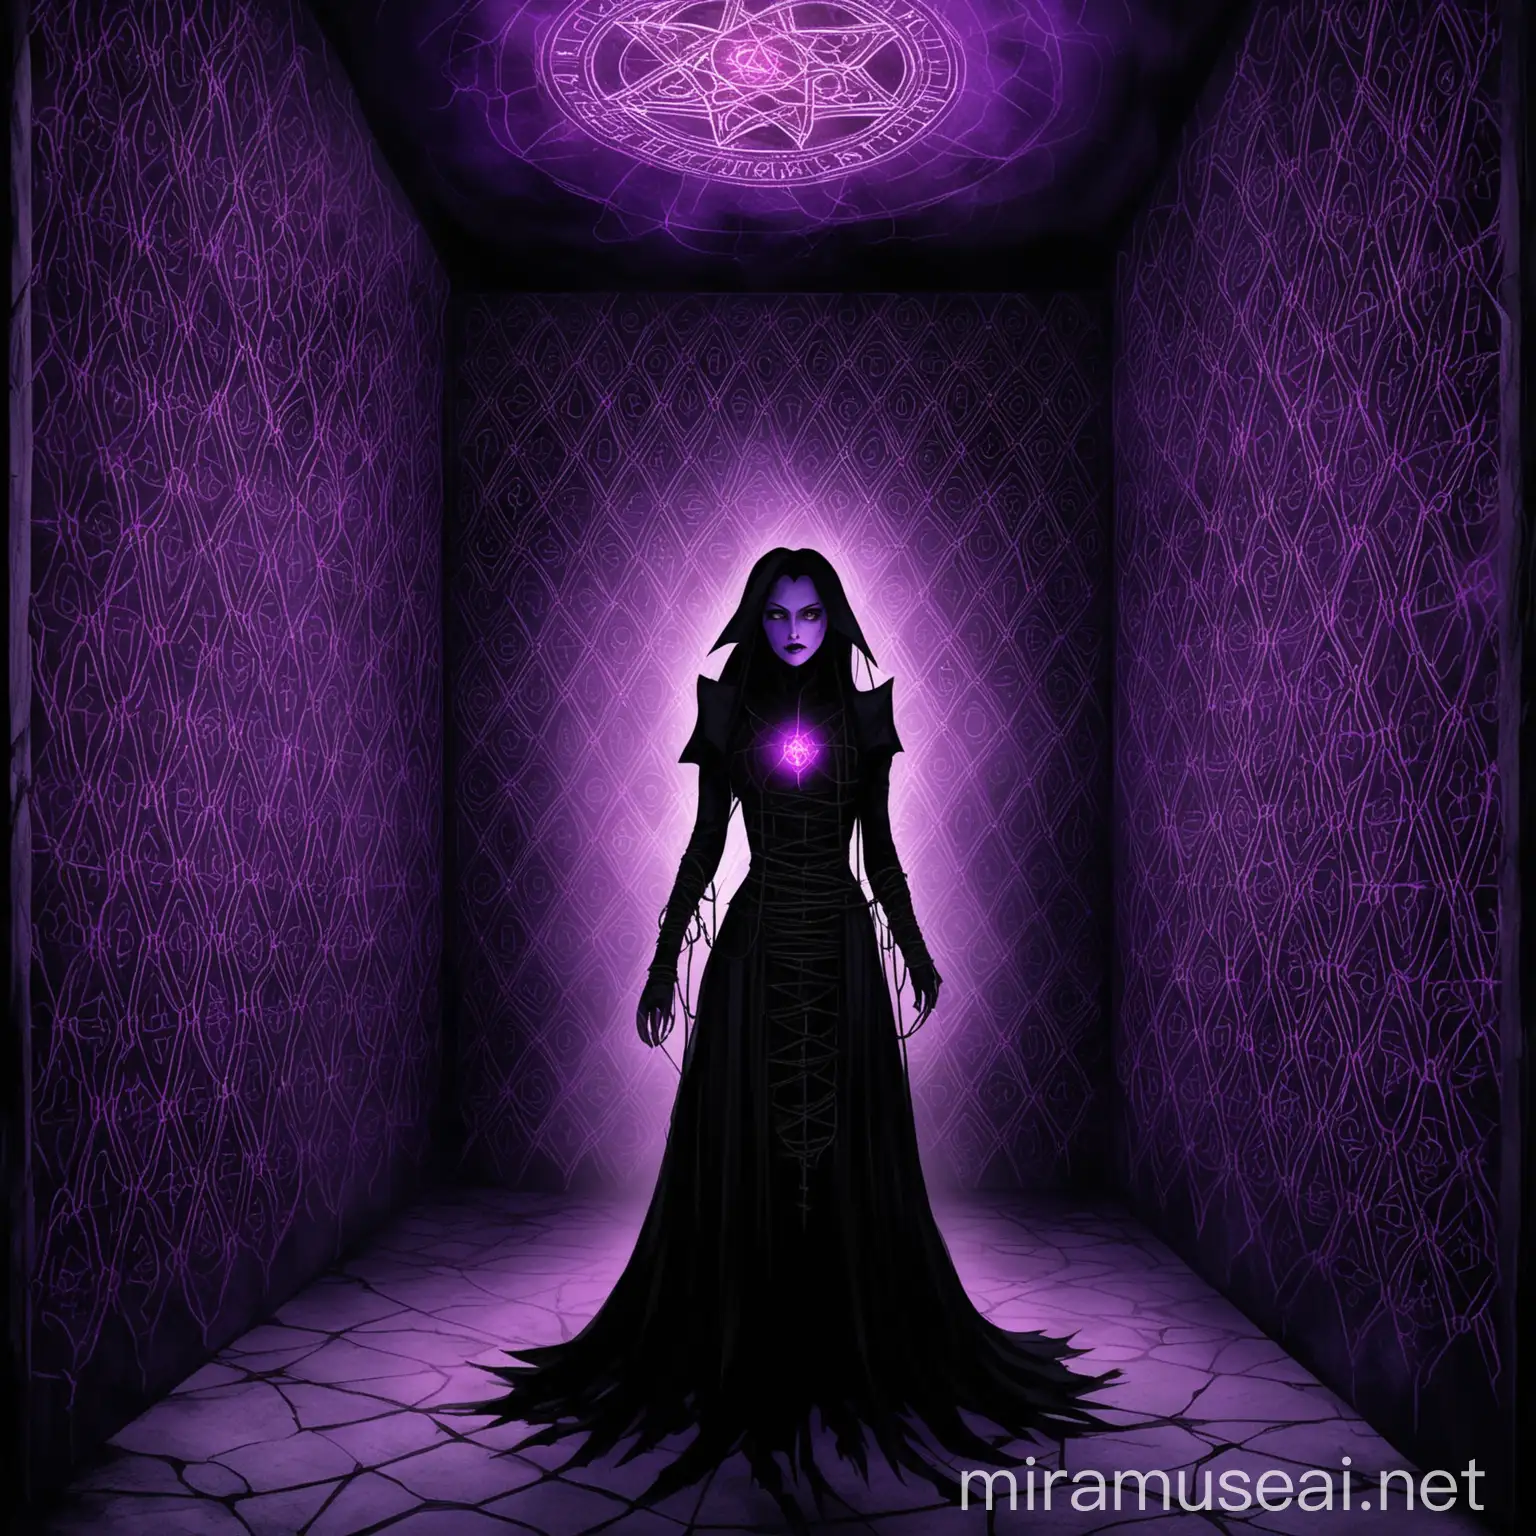 The walls are filled with Enochian patterns, and purple light is emitted from them.
Dracula, dressed in black, is distressed because she is trapped in a bondage.